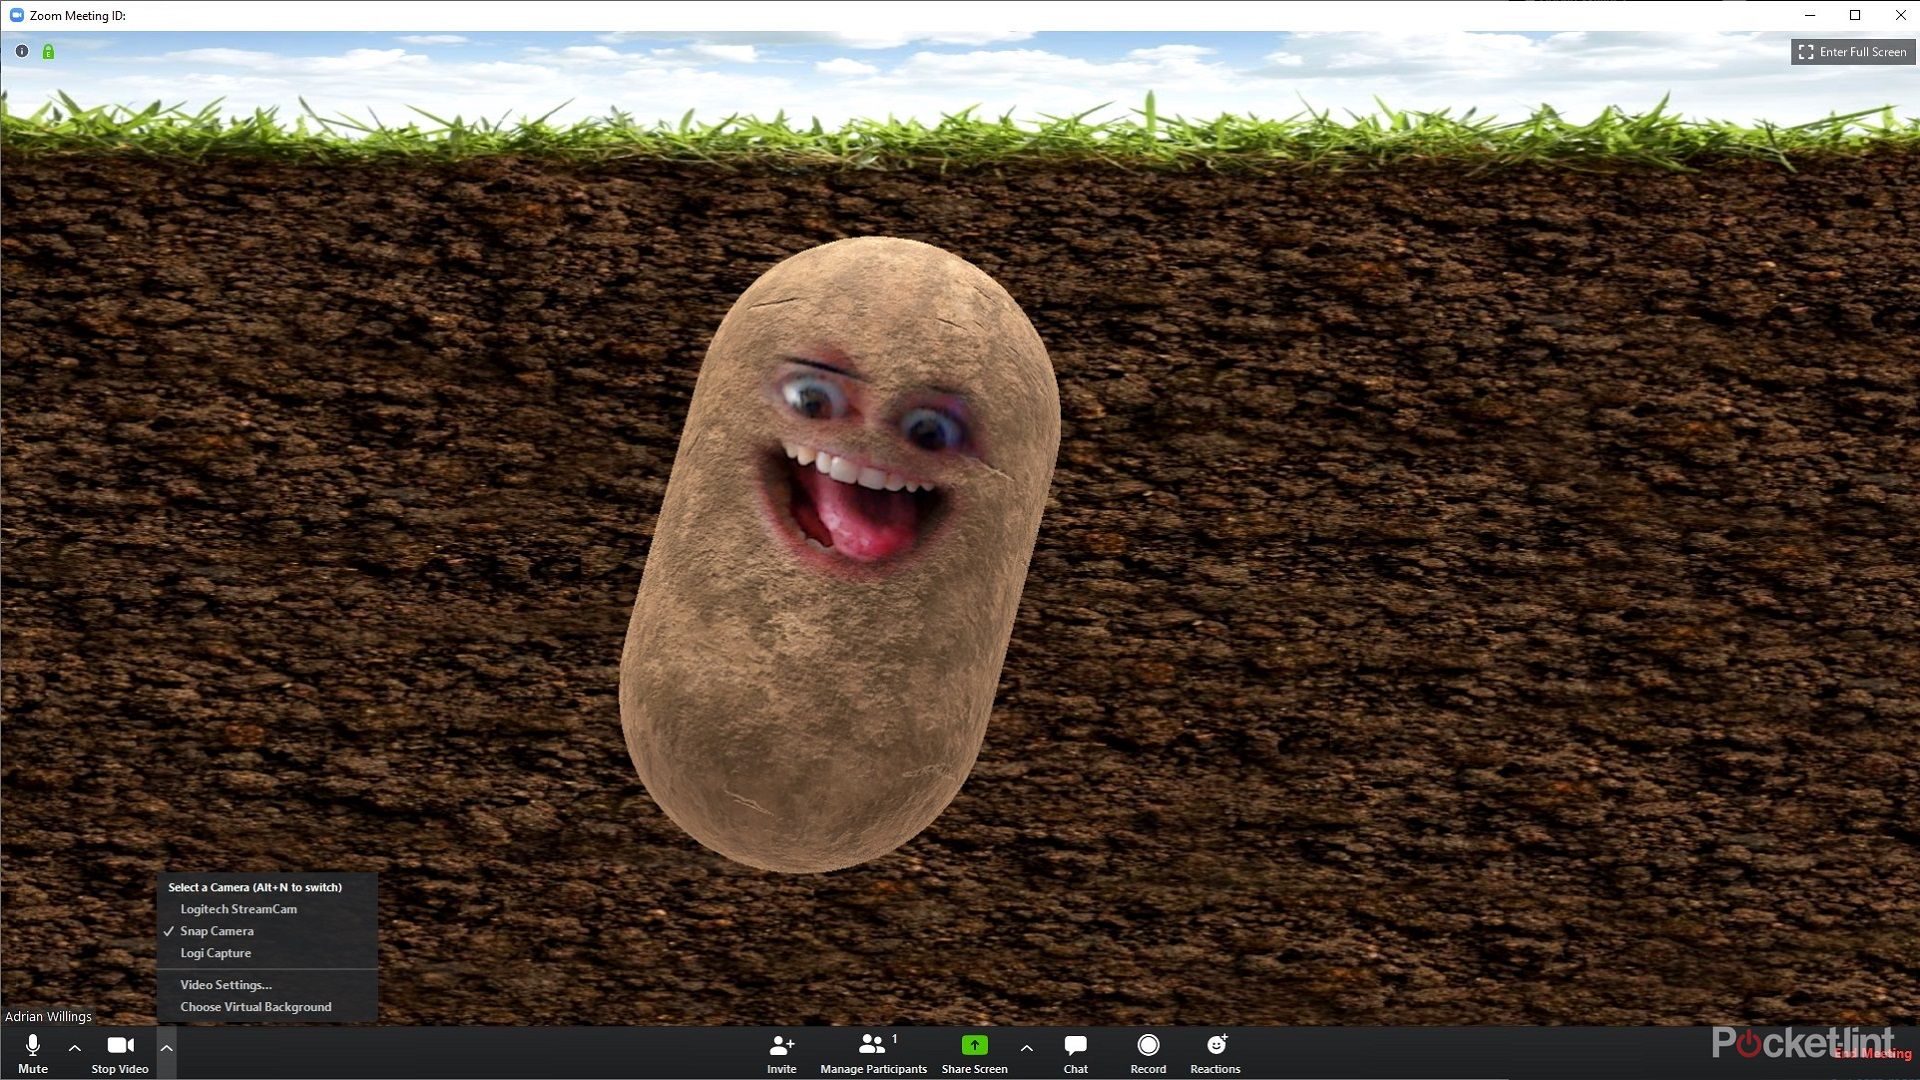 How to be a potato in Zoom image 1